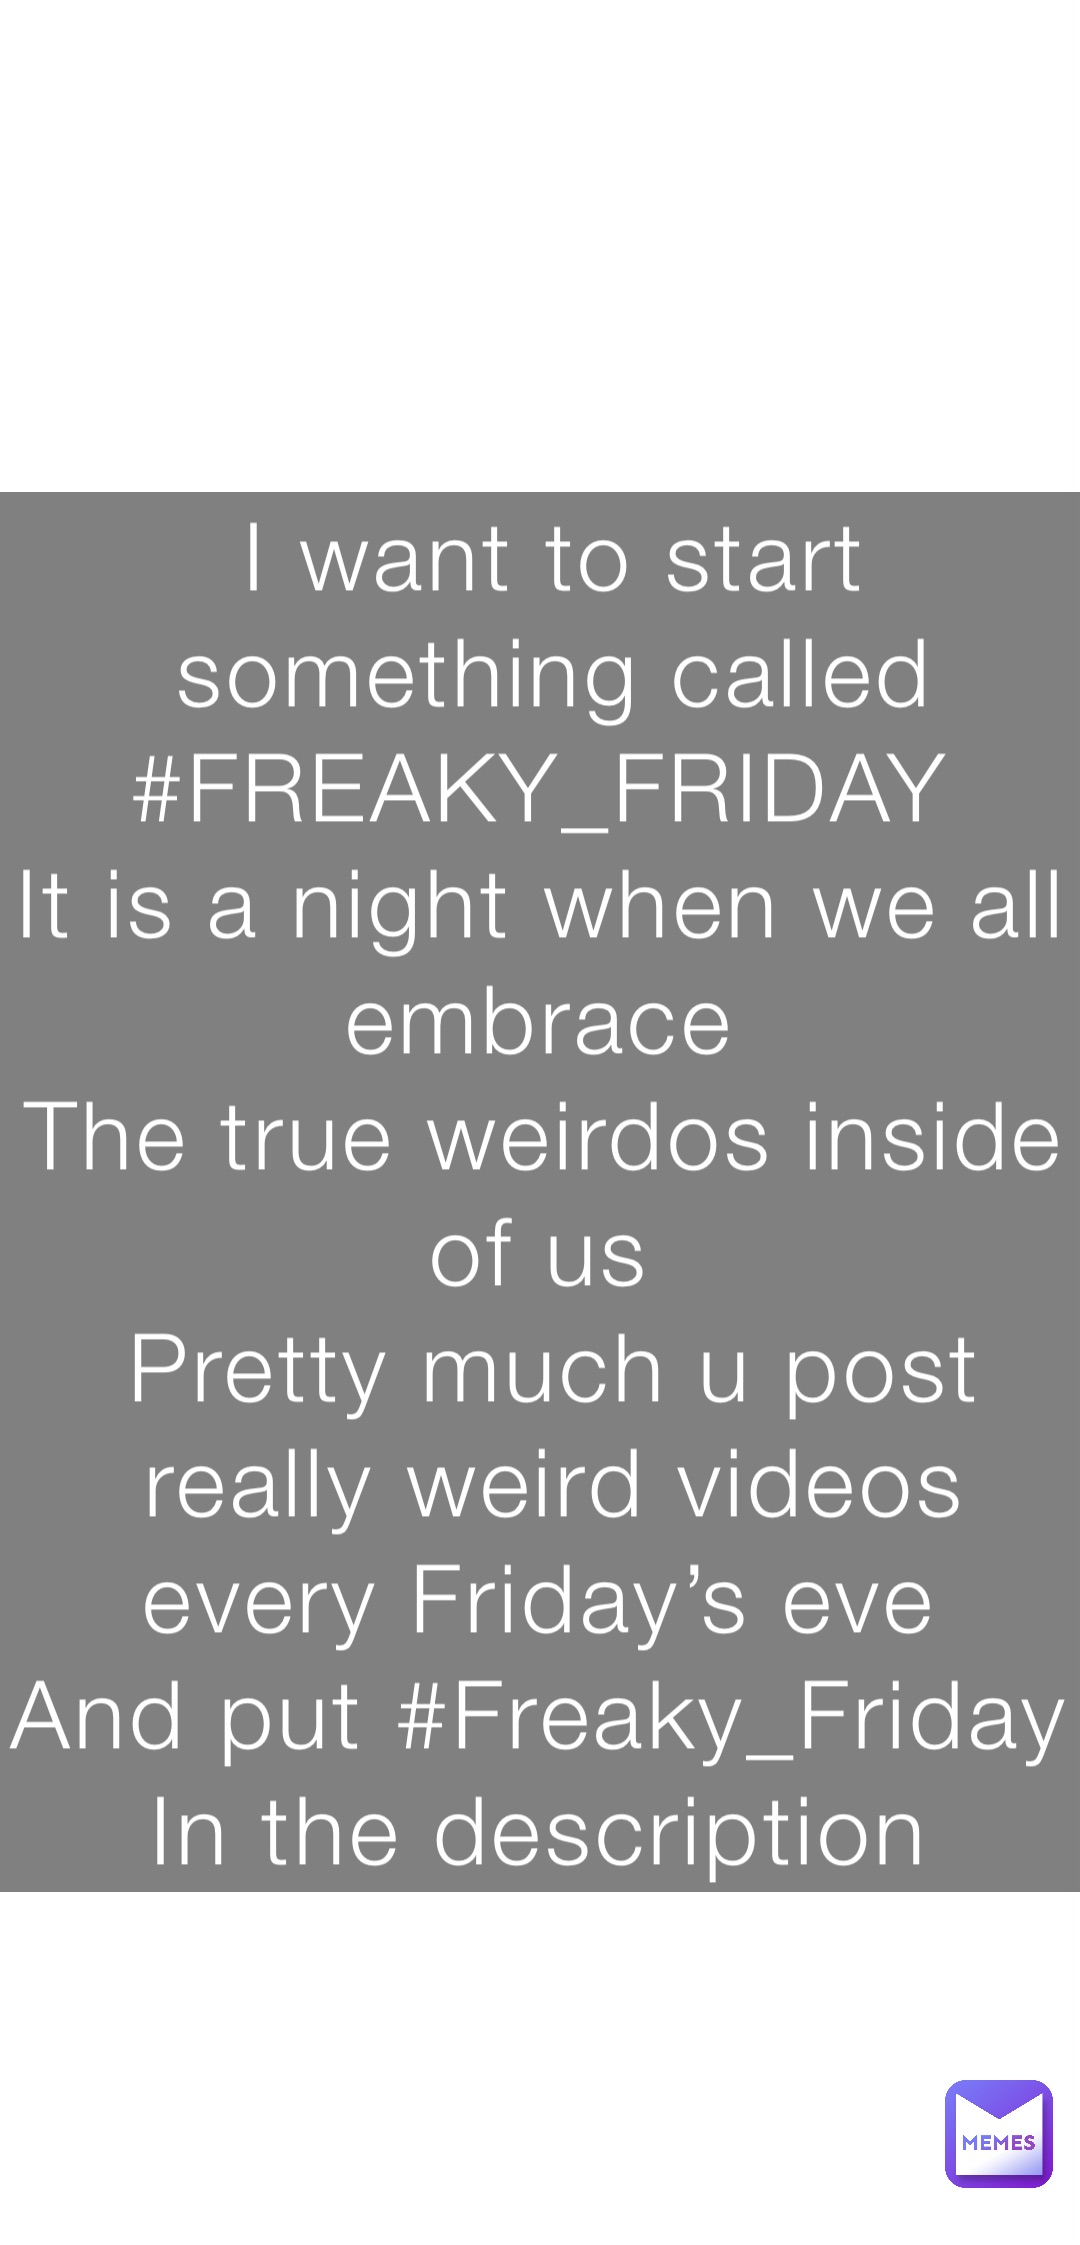 I want to start something called 
#FREAKY_FRIDAY
It is a night when we all embrace
The true weirdos inside of us
Pretty much u post really weird videos every Friday’s eve
And put #Freaky_Friday 
In the description